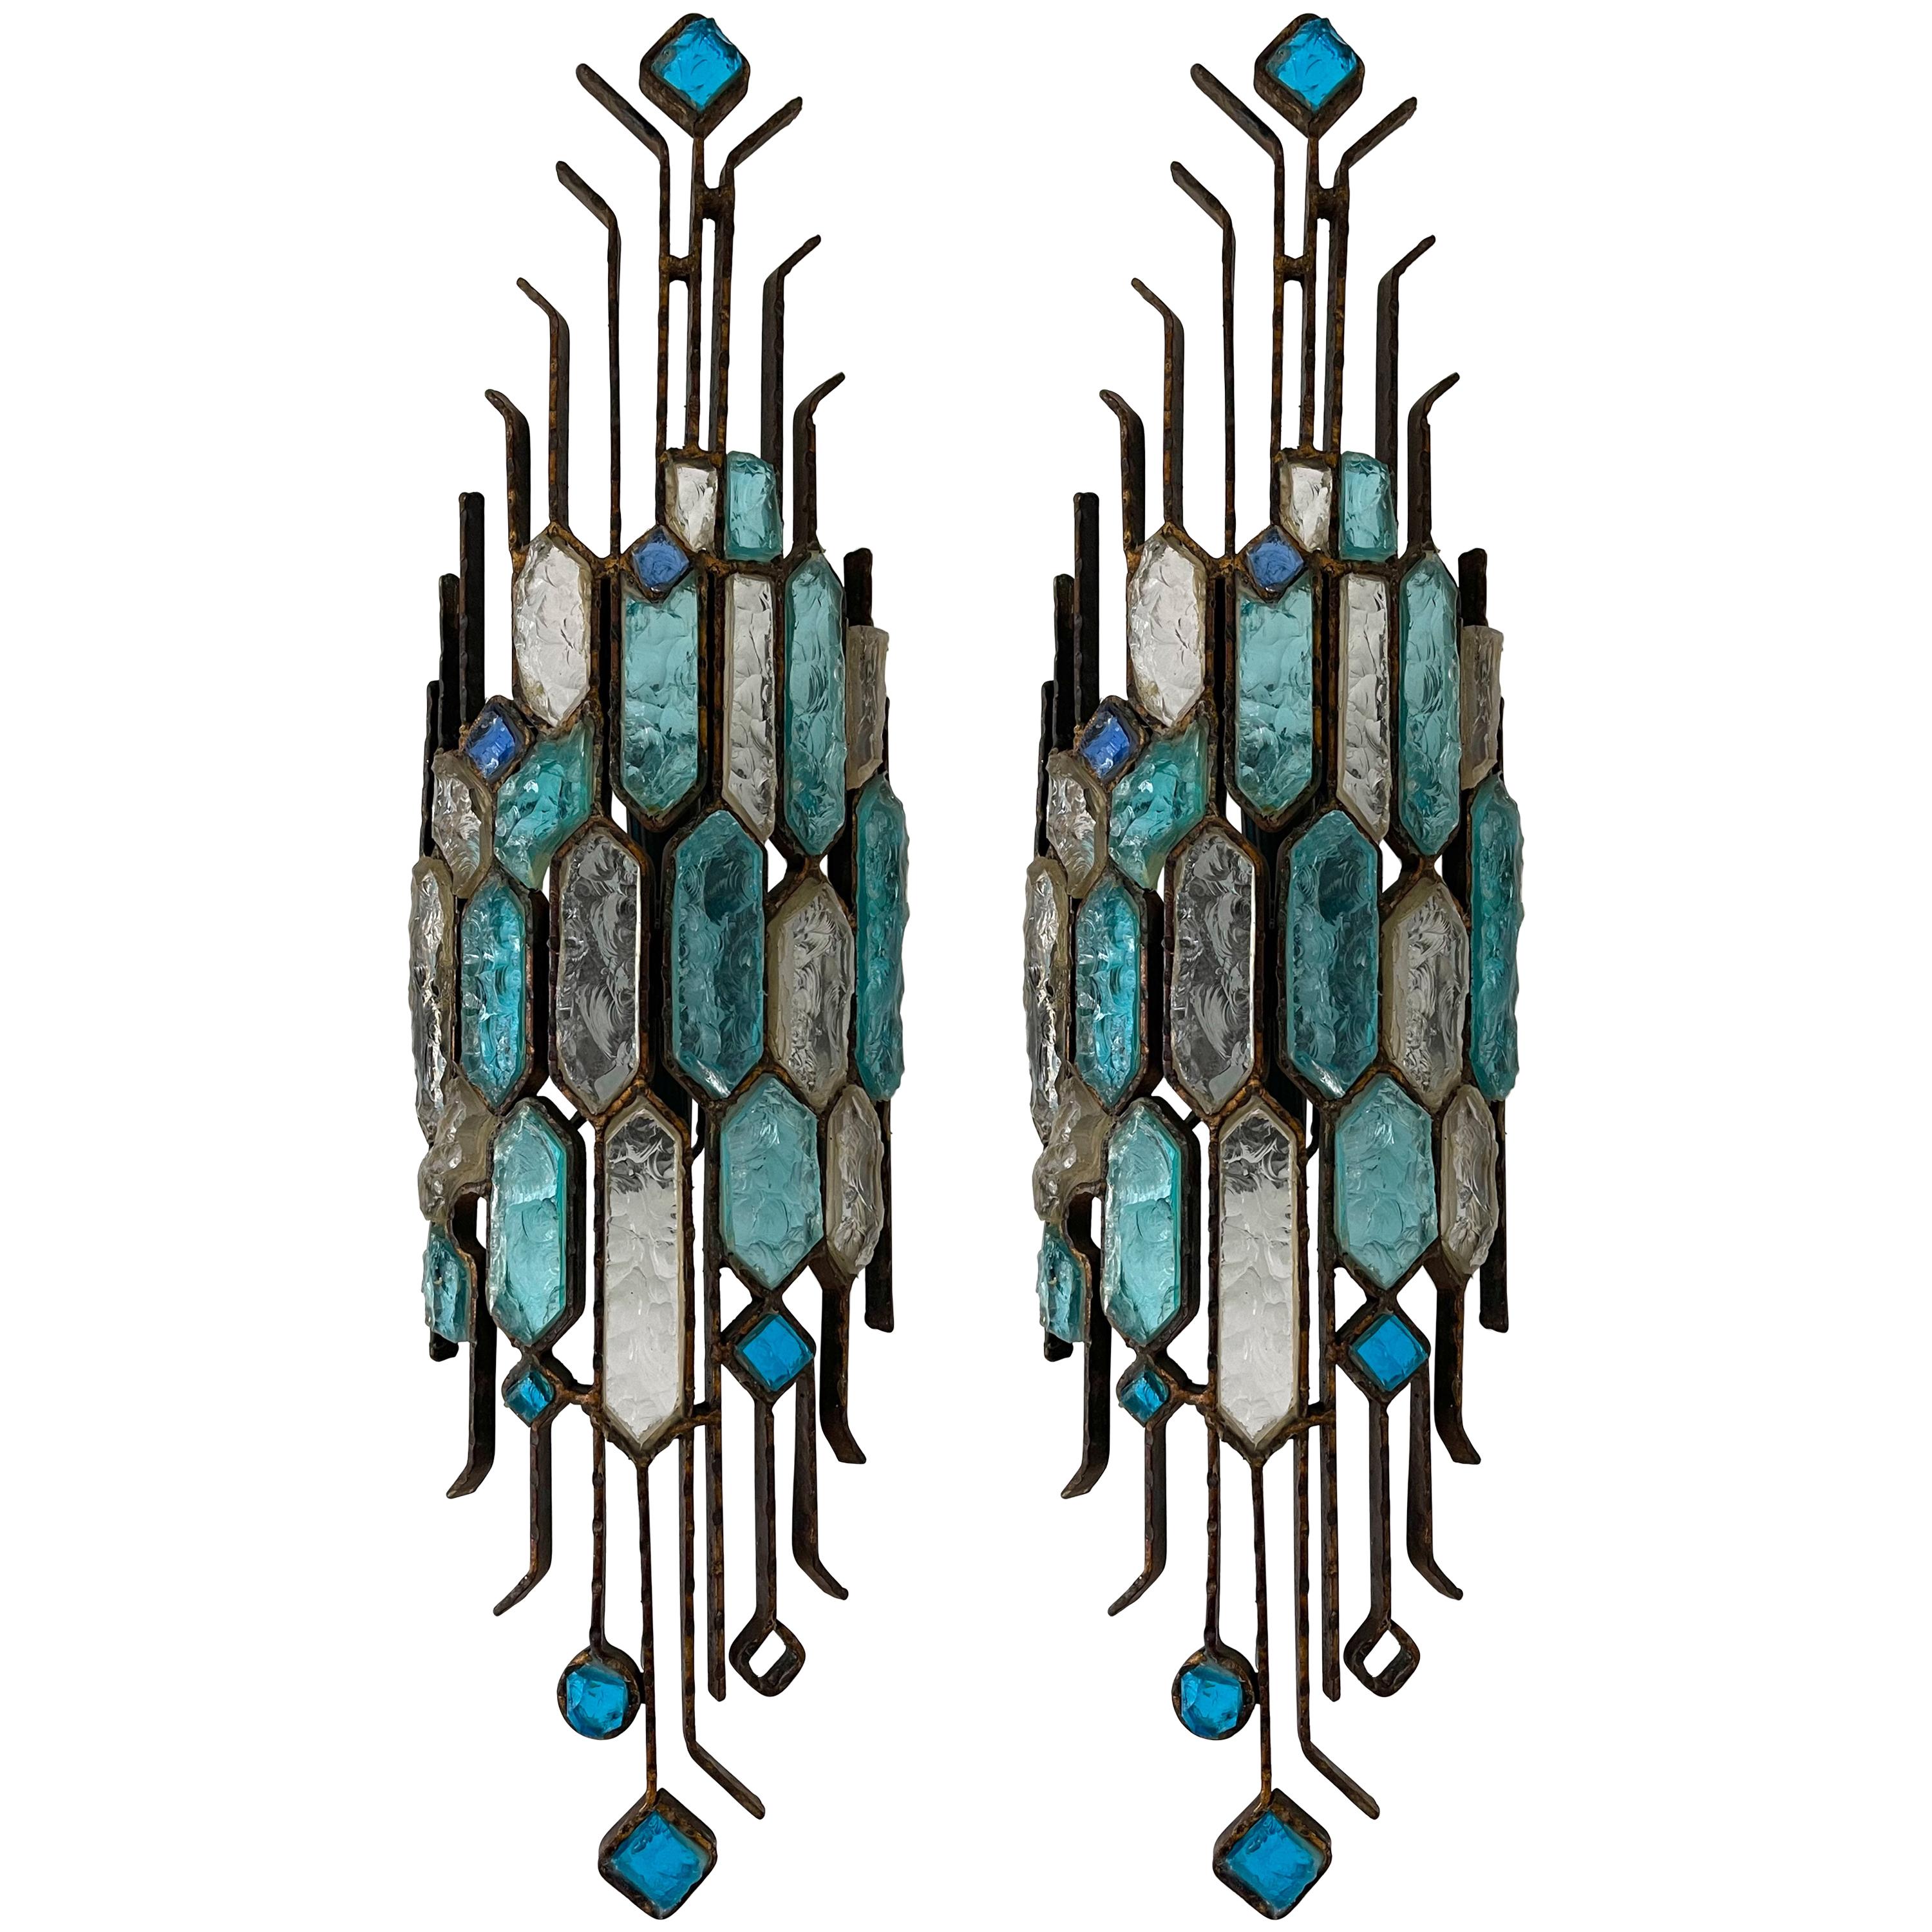 Pair of Hammered Glass and Wrought Iron Sconces by Longobard, Italy, 1970s